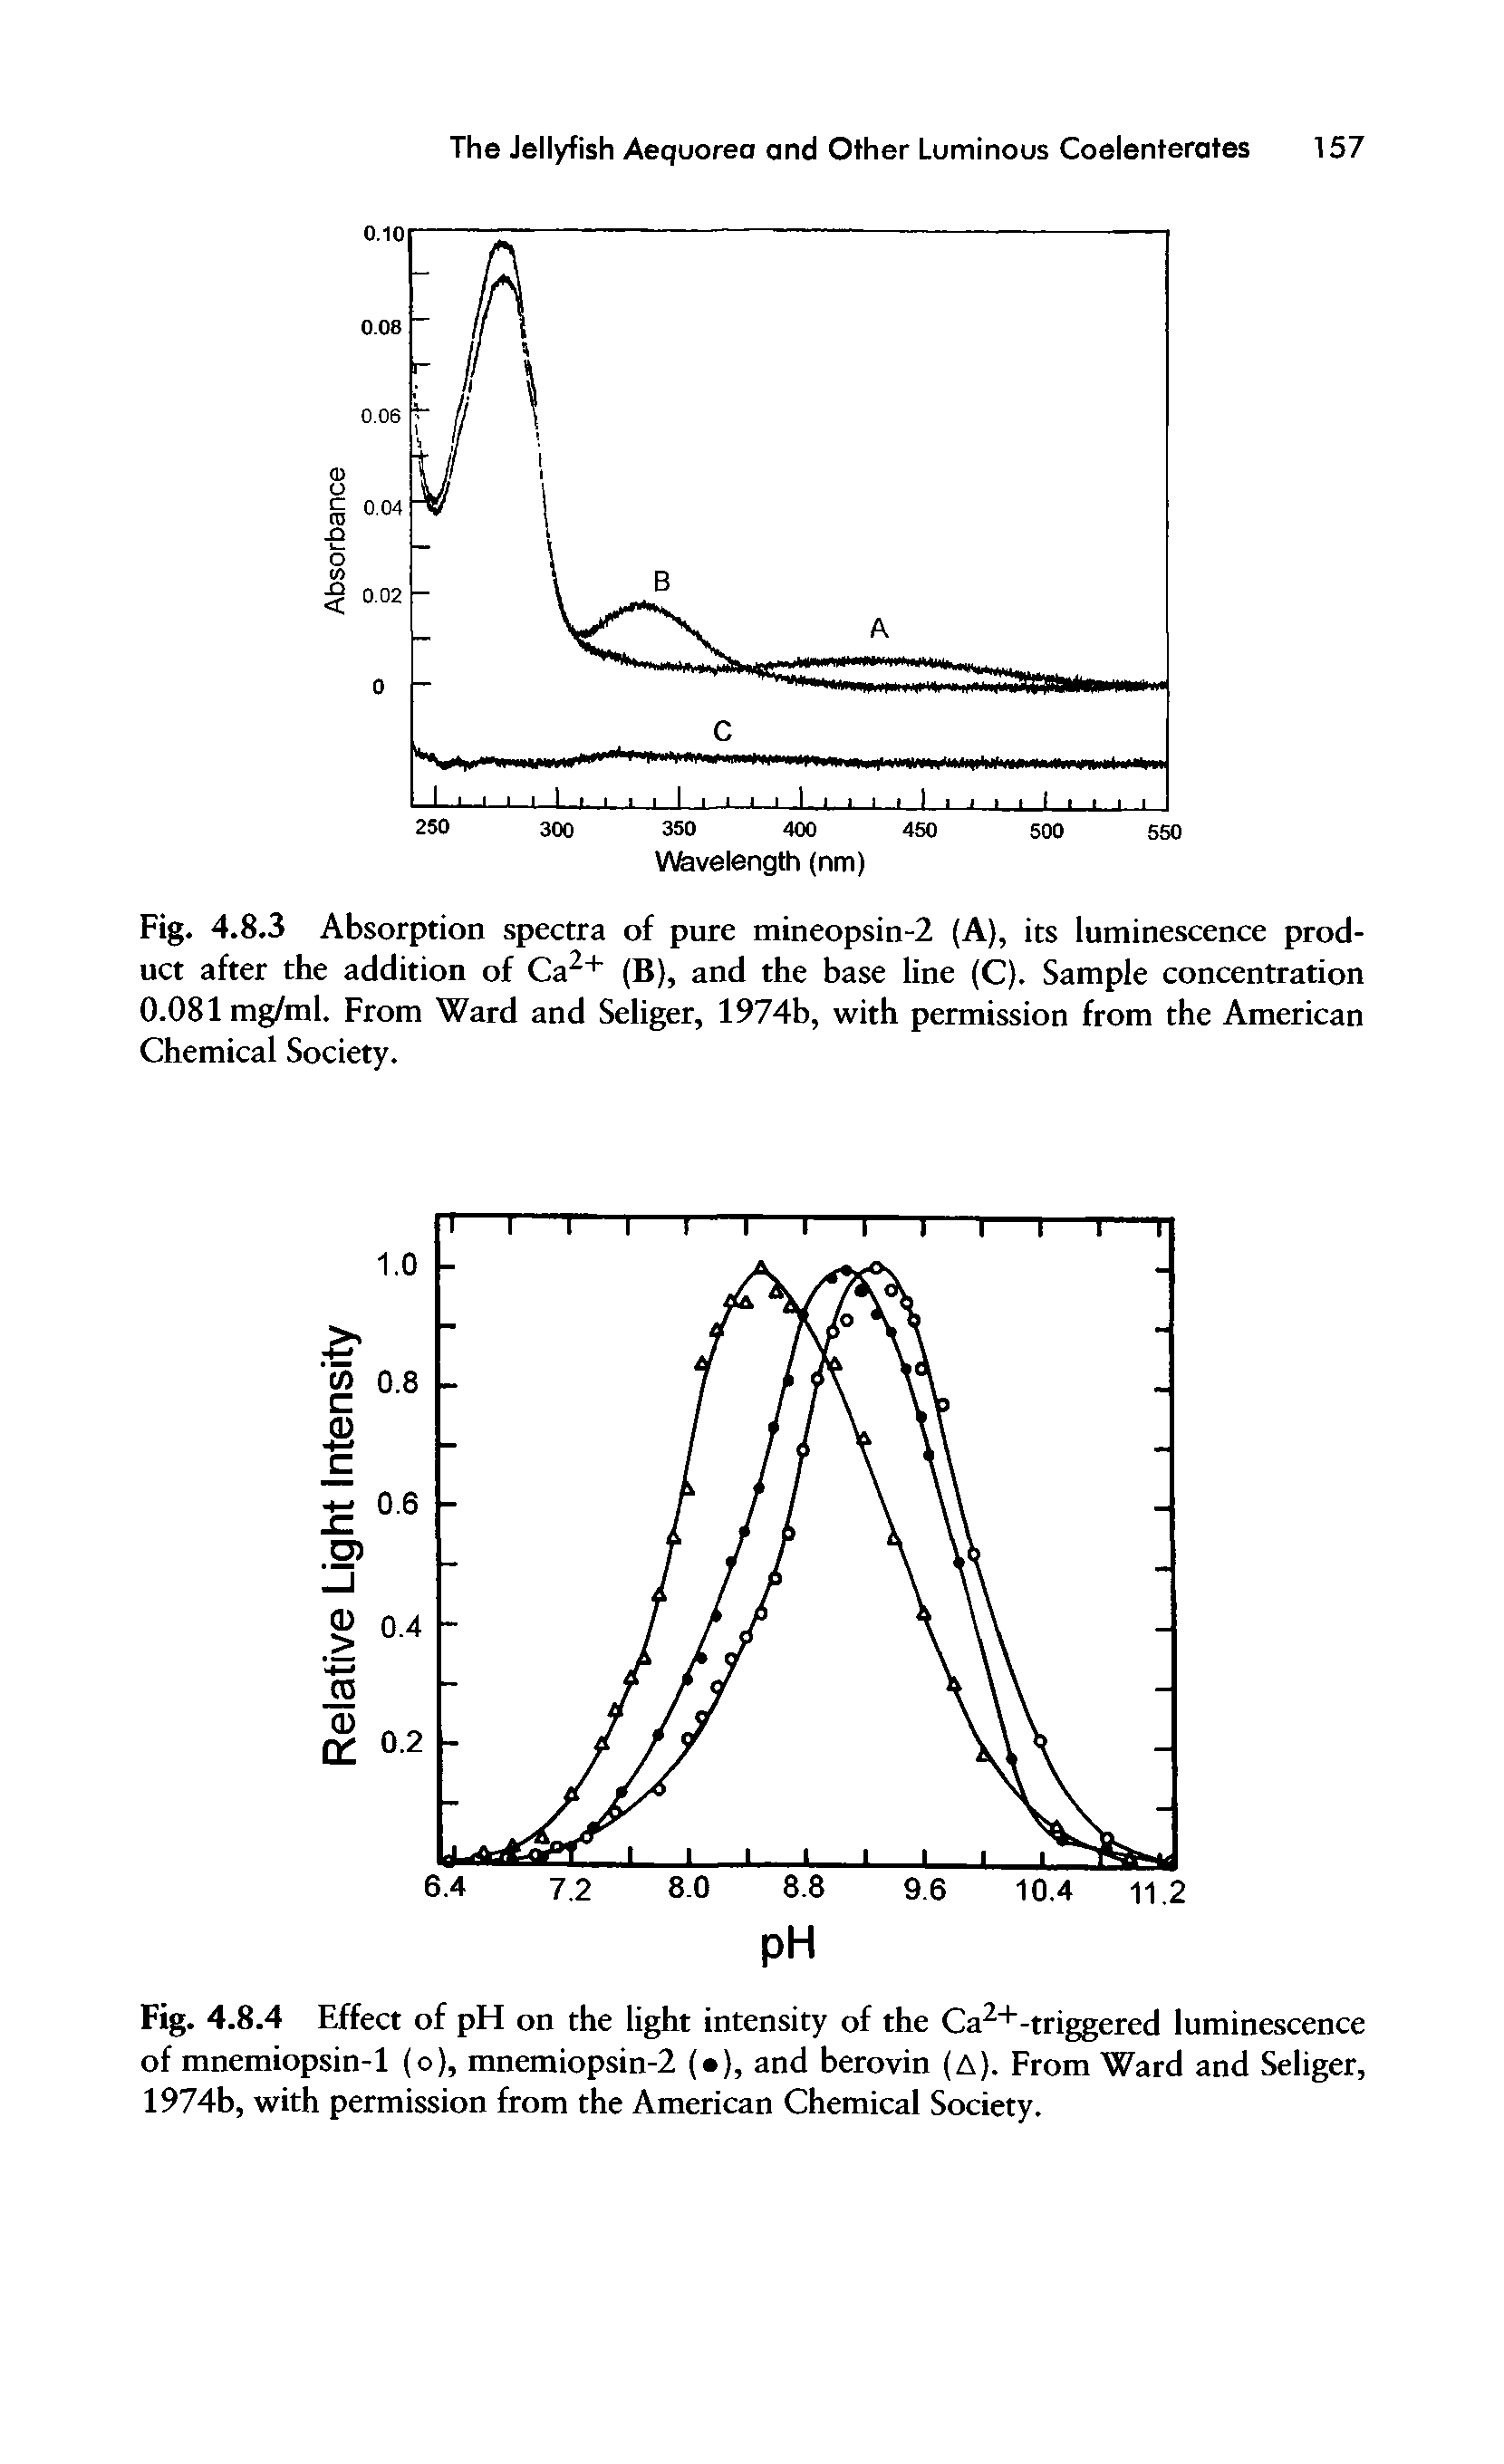 Fig. 4.8.3 Absorption spectra of pure mineopsin-2 (A), its luminescence product after the addition of Ca2+ (B), and the base line (C). Sample concentration 0.081 mg/ml. From Ward and Seliger, 1974b, with permission from the American Chemical Society.